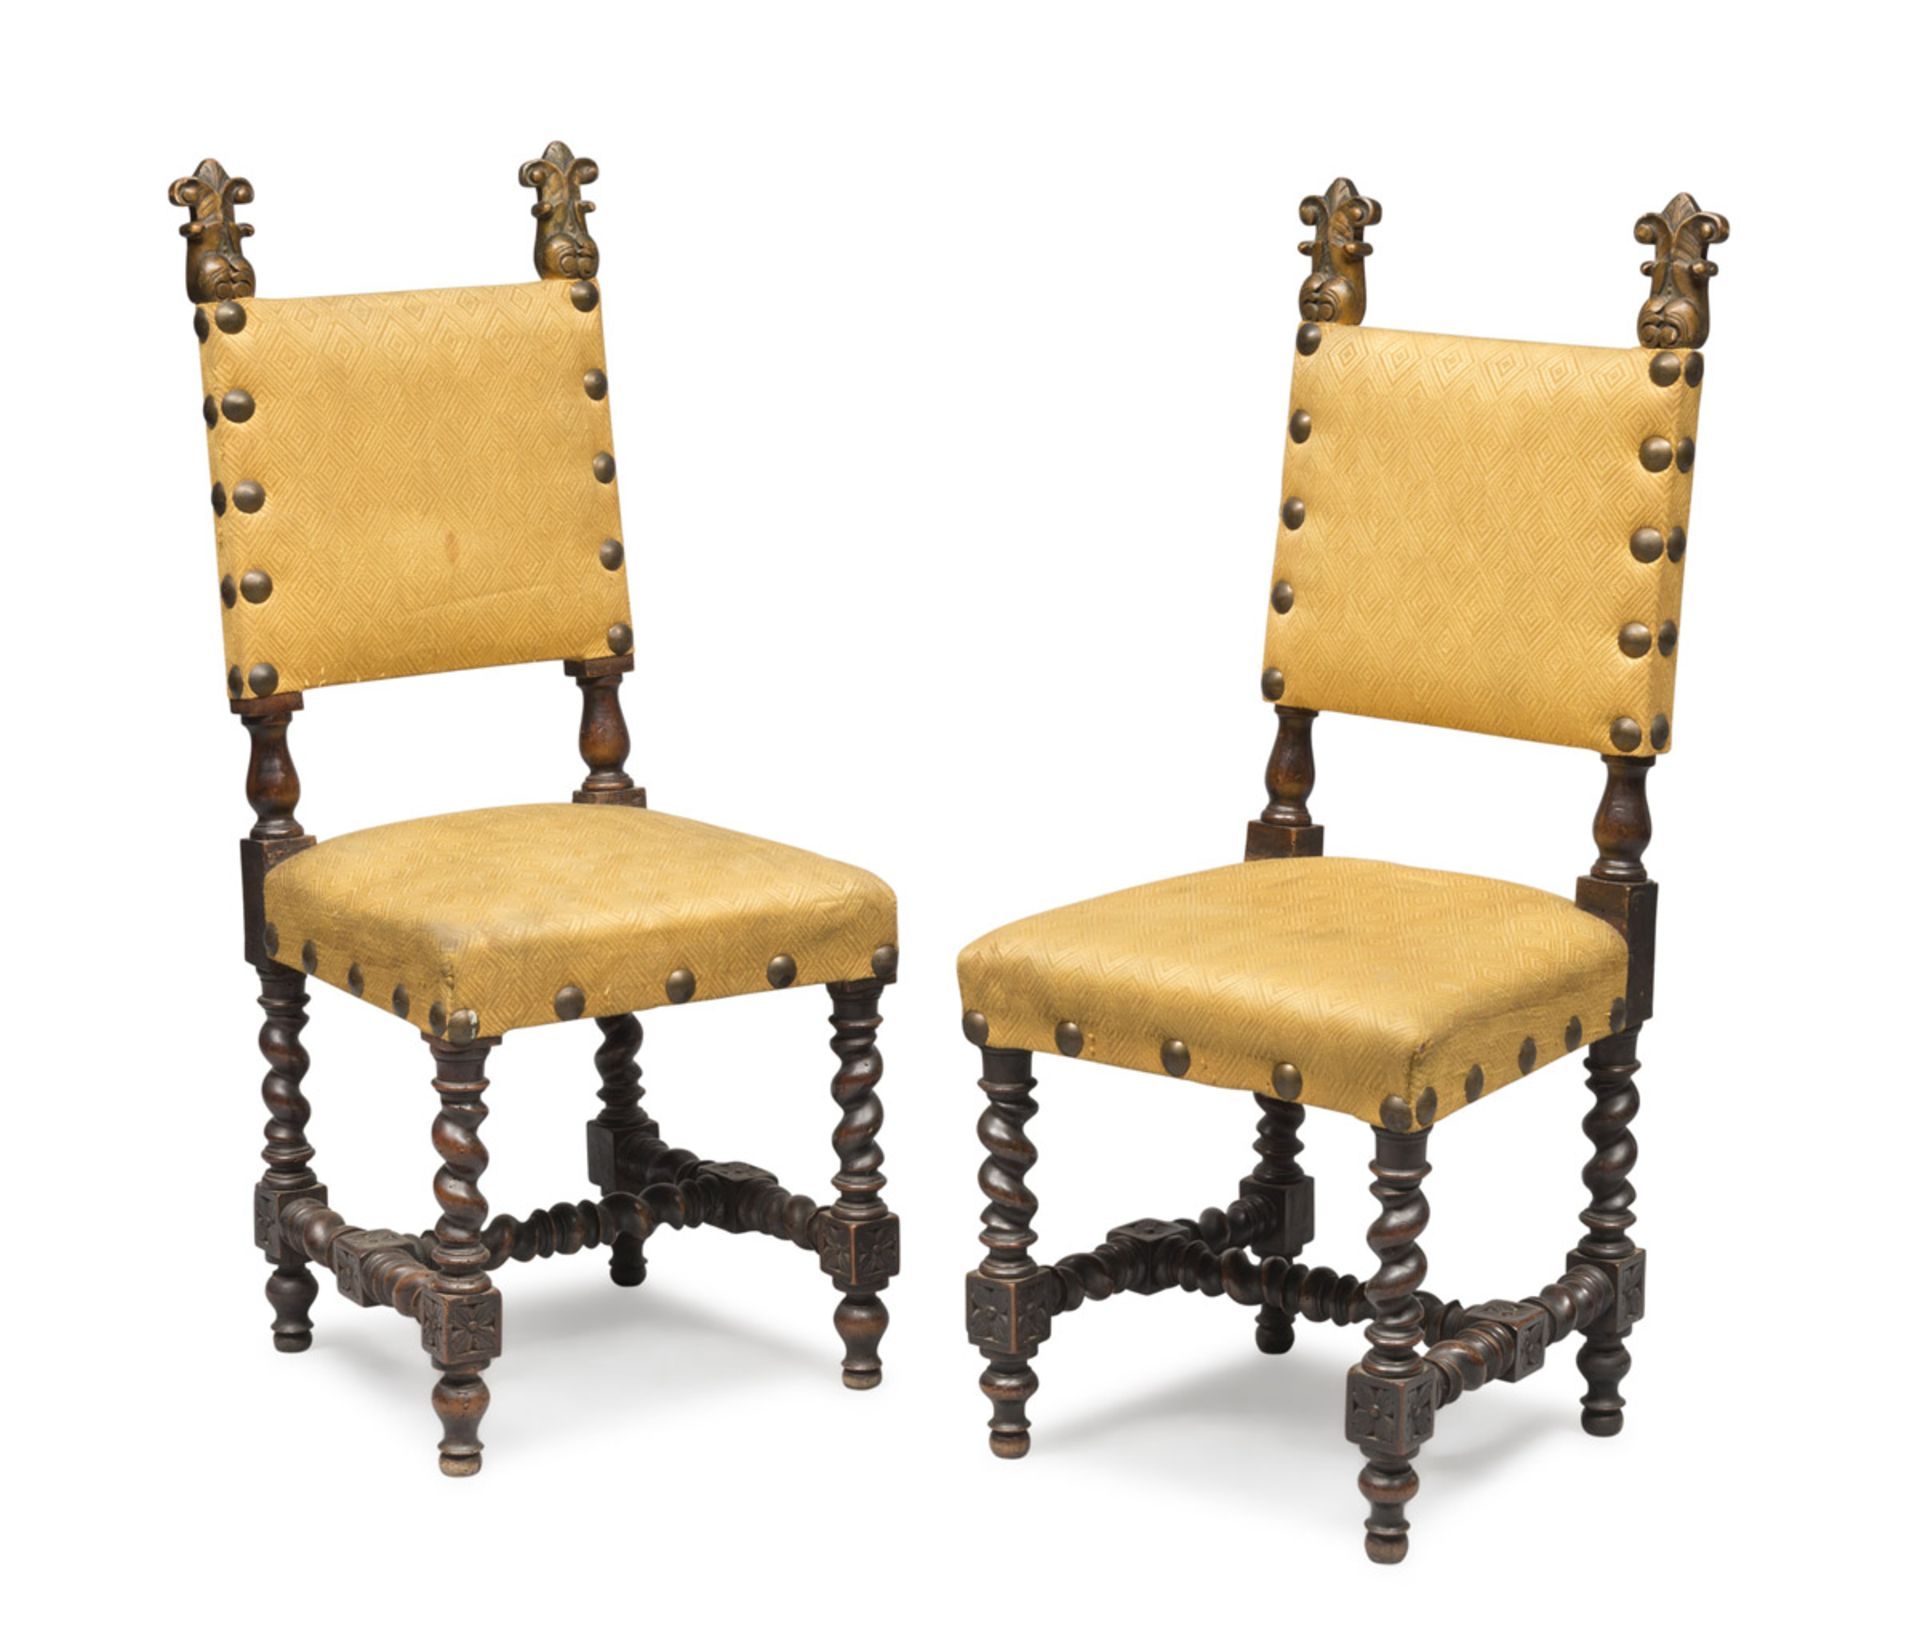 PAIR OF WALNUT CHAIRS, 19TH CENTURY of Renaissance taste, twisted legs and stretchers. Measures